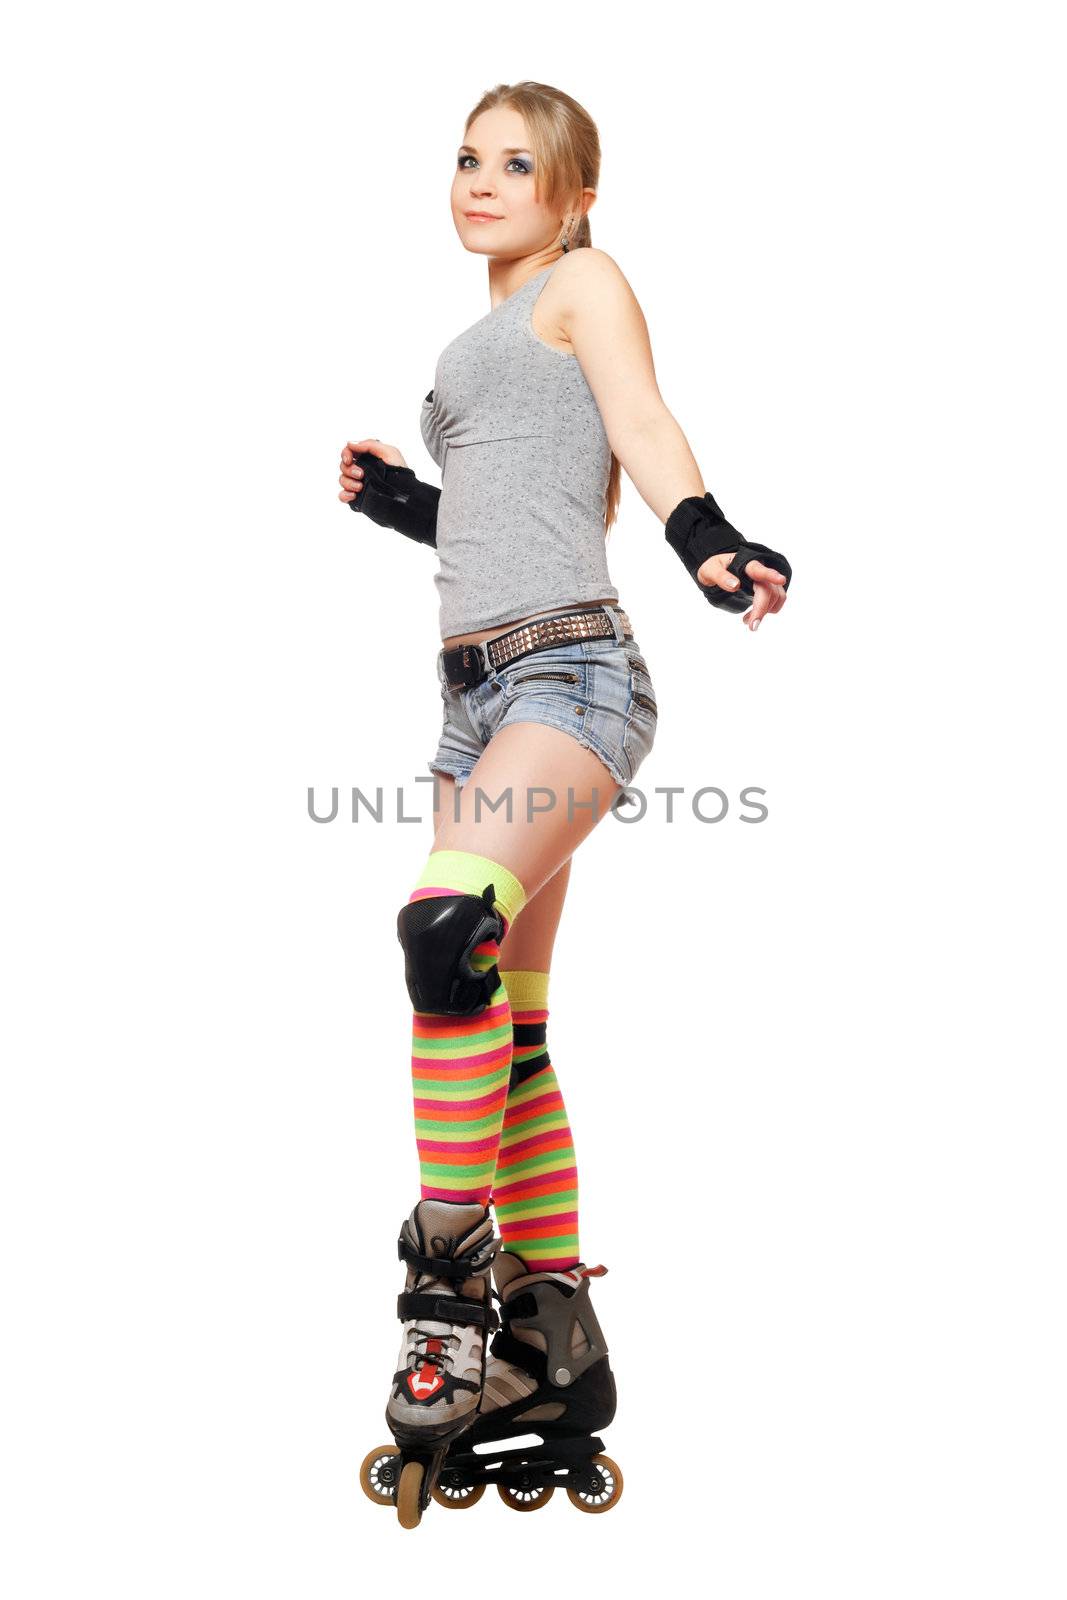 Attractive young blonde on roller skates by acidgrey